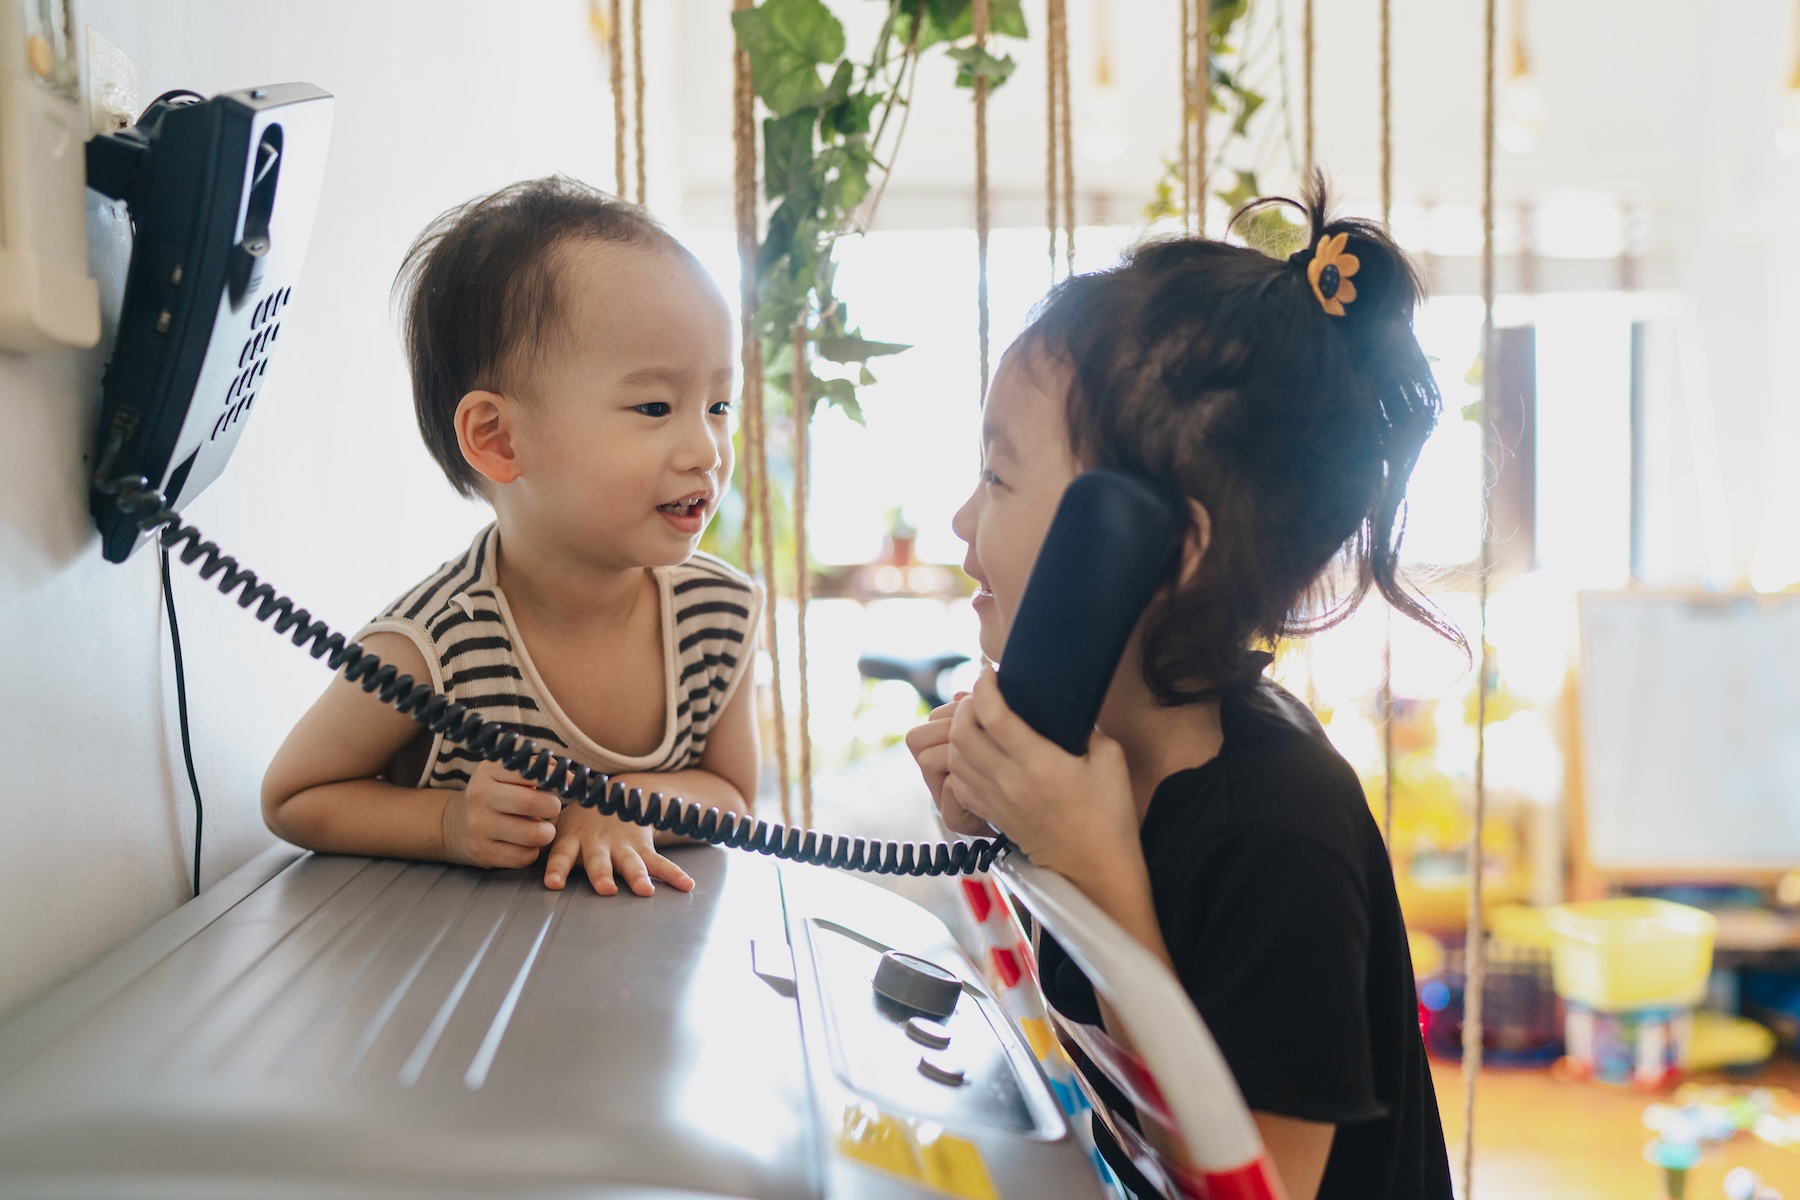 Two small children play and laugh while pretending to talk on a landline phone